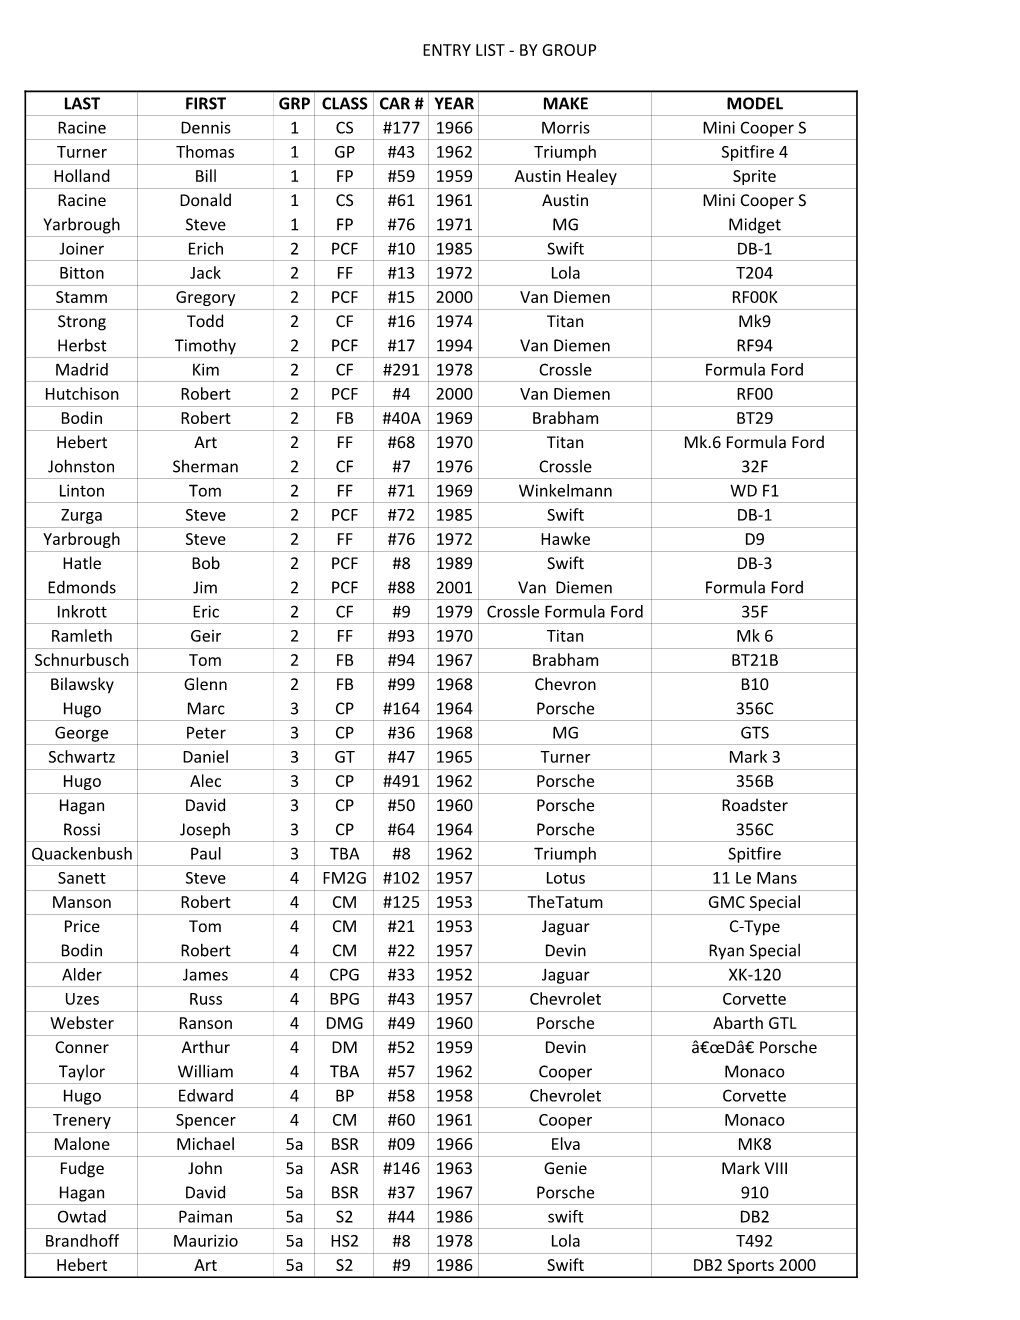 2021 ENTRY LIST by GROUP.Xlsx